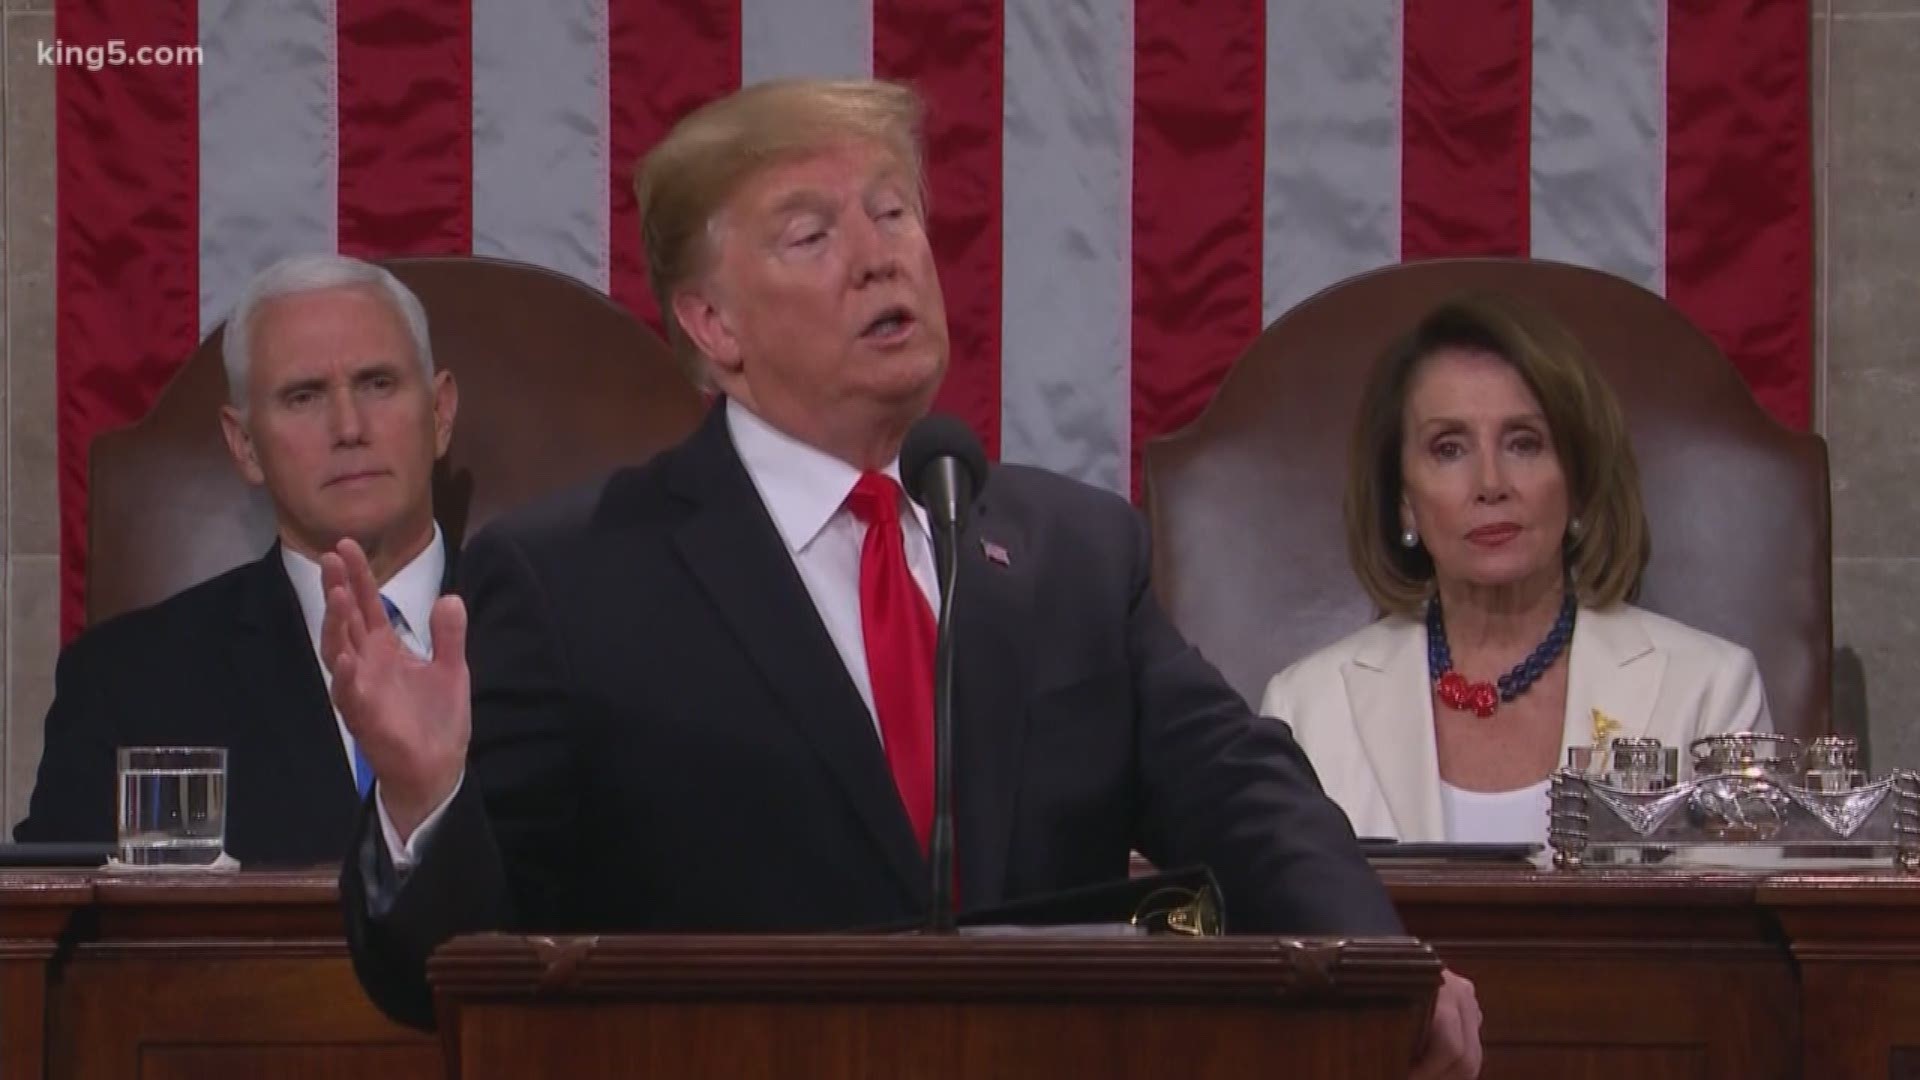 Several Washington state lawmakers shared their reactions to President Trump's State of the Union address on Tuesday night.